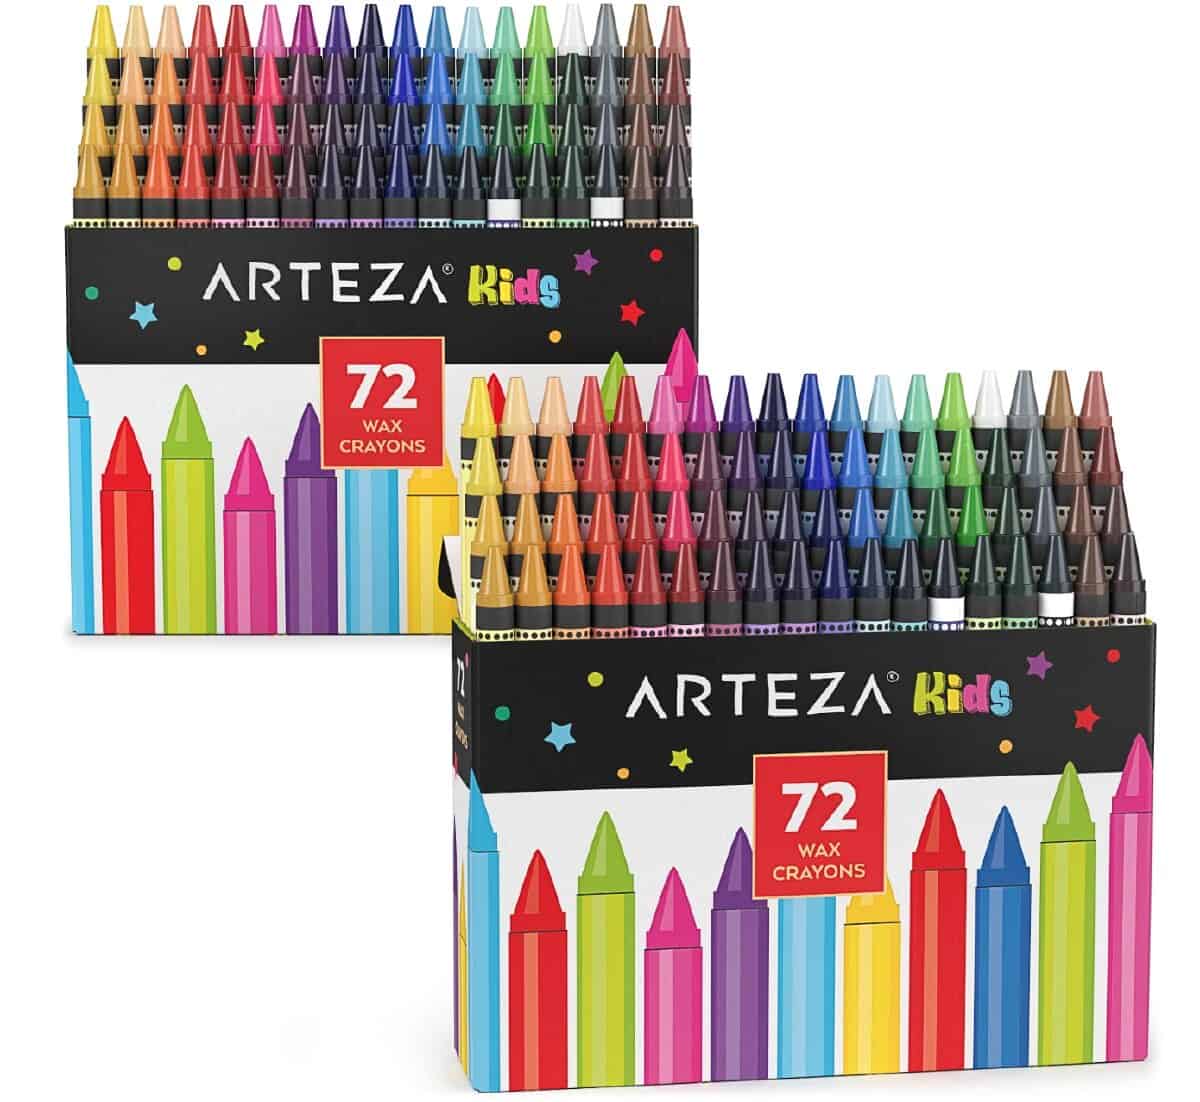 Two large 72 count boxes of Arteza crayons on a white background. 